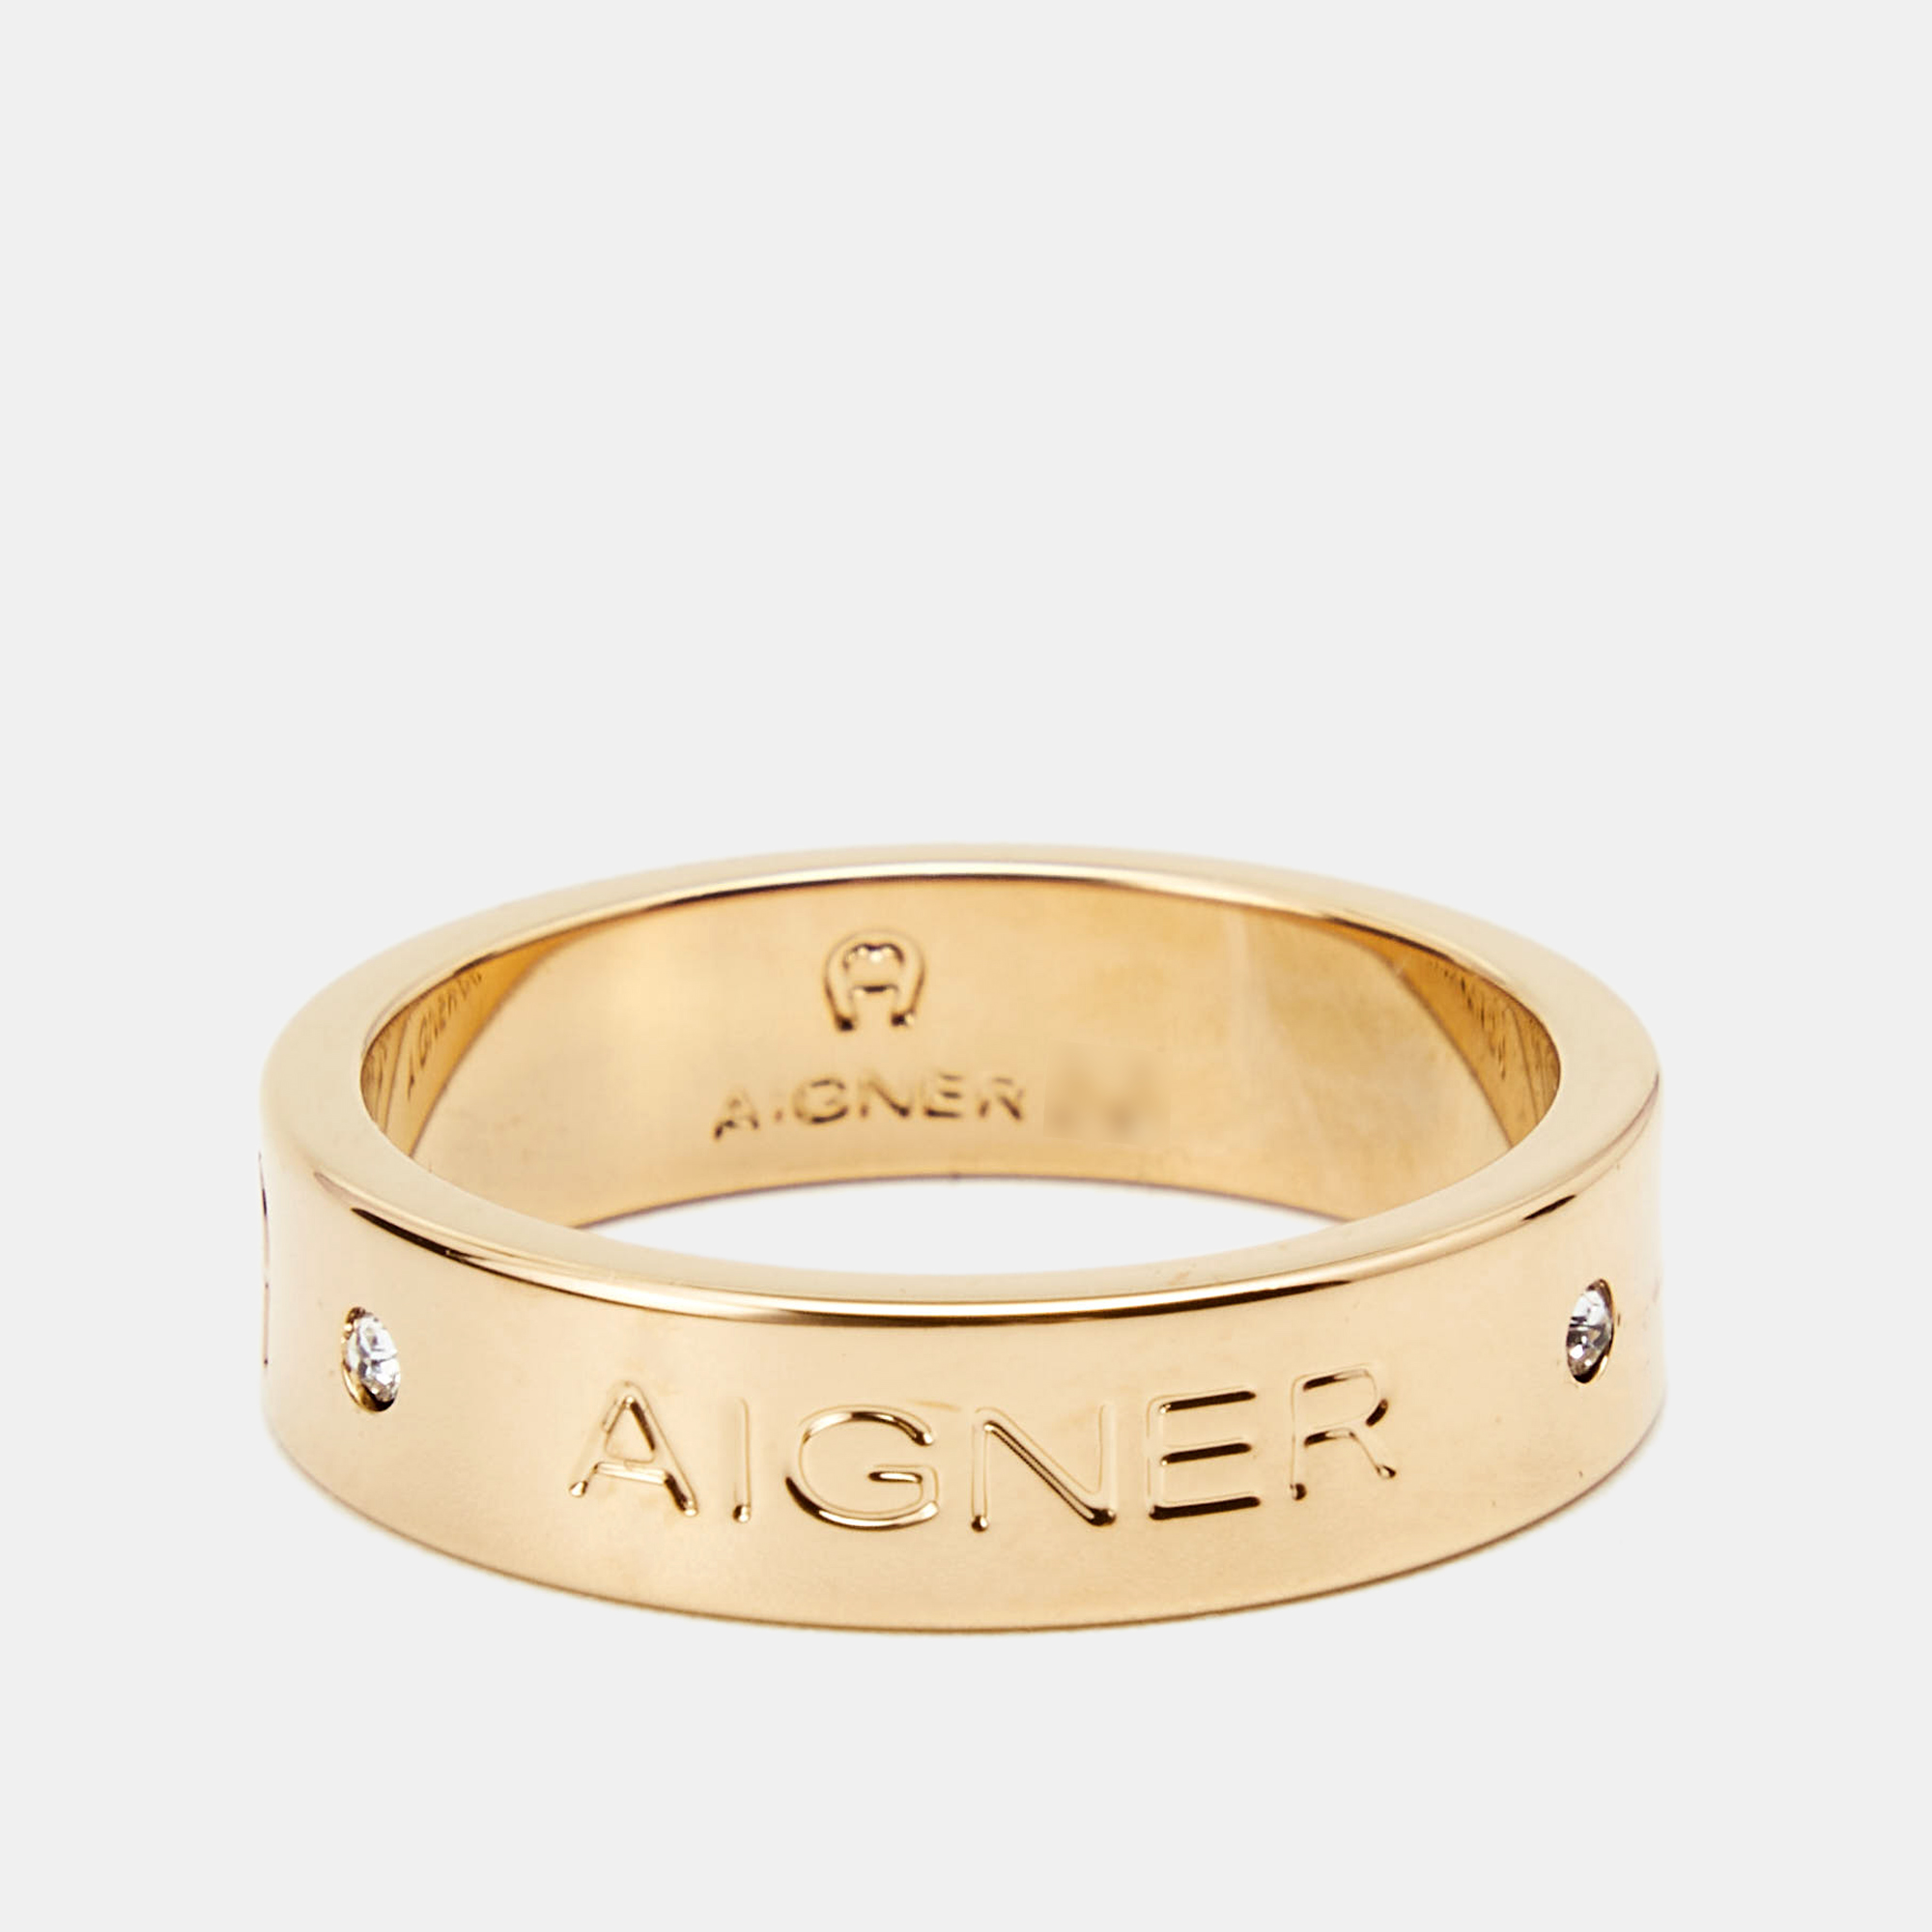 Aigner Crystals Gold Tone Ring Size 55